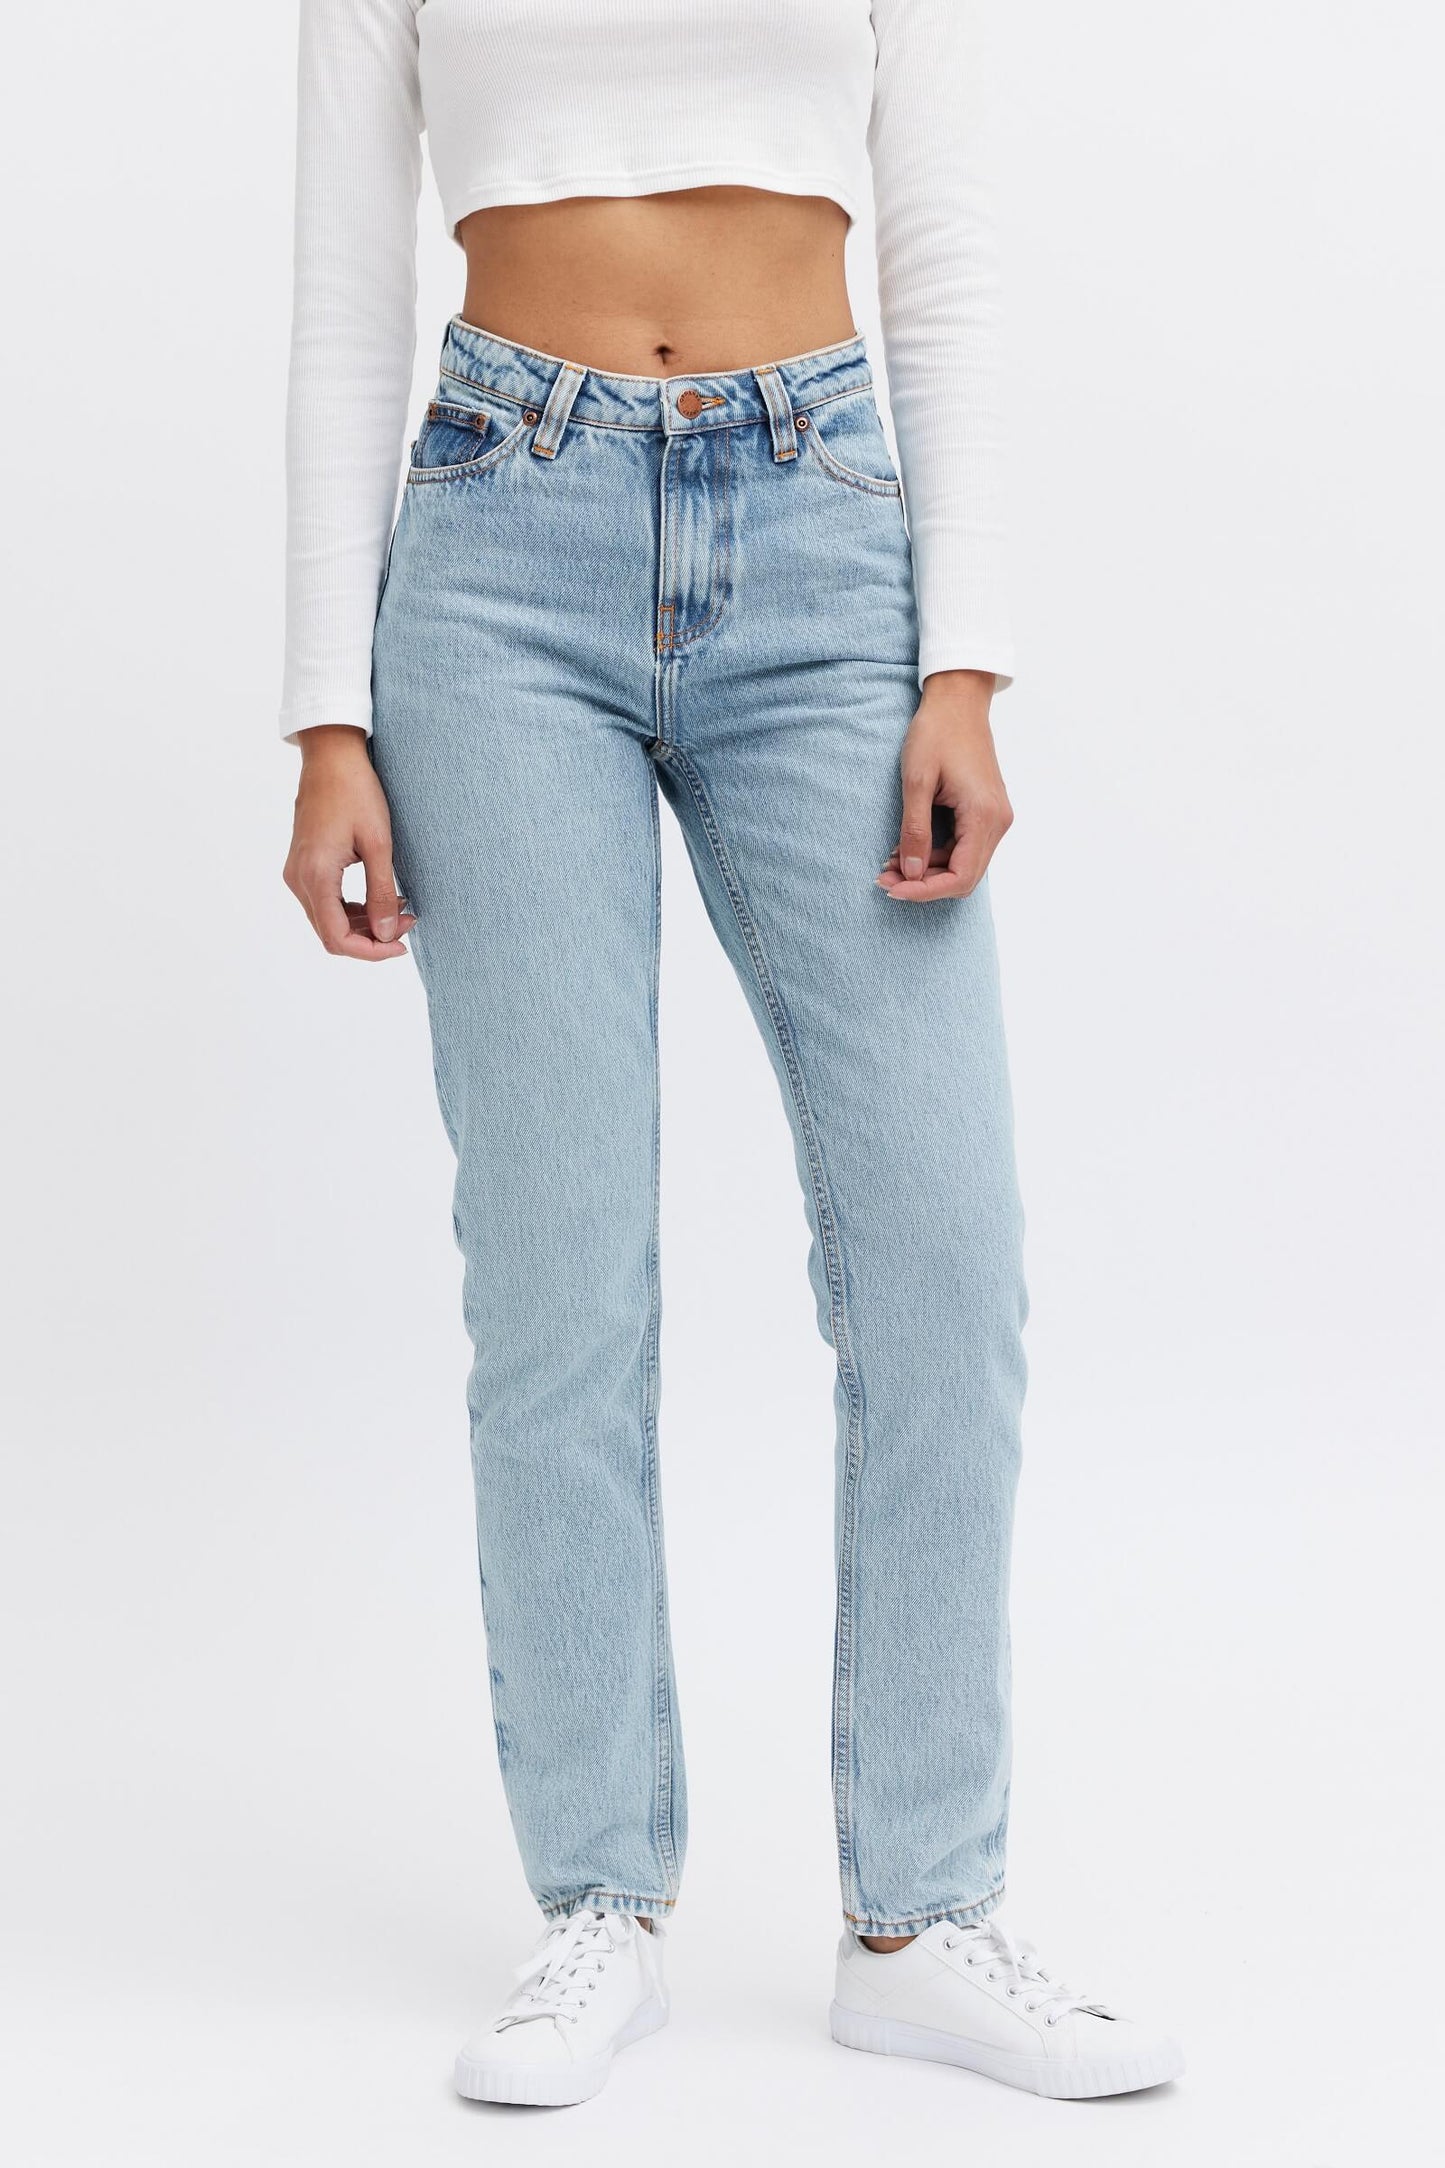 Organic classic jeans for women with a high waist and tapered leg